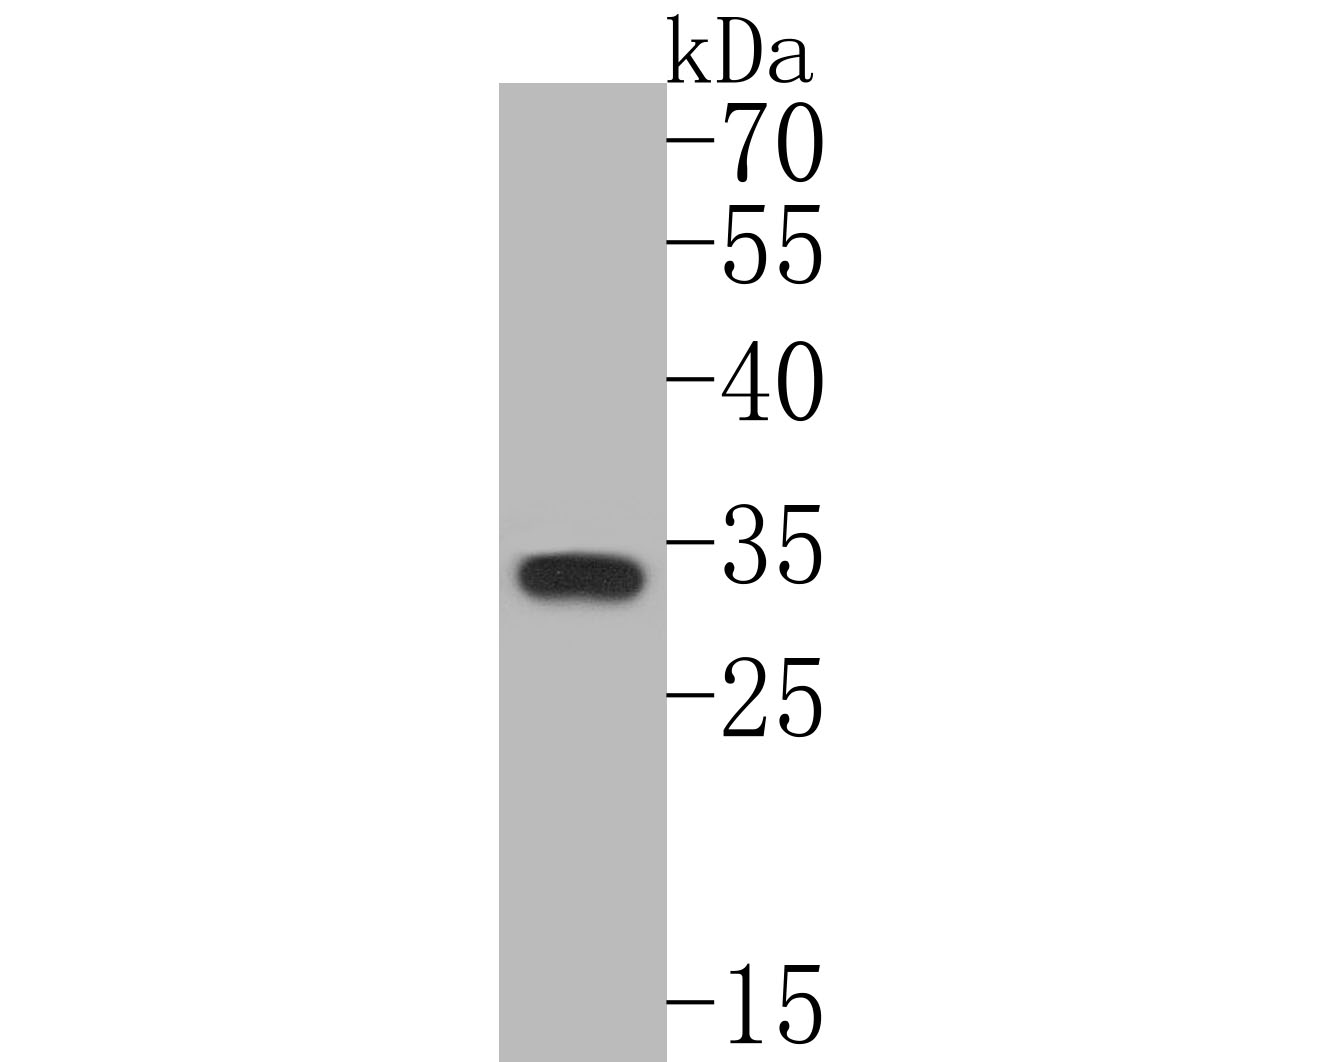 Western blot analysis of PYCR1 on HepG2 cell lysates. Proteins were transferred to a PVDF membrane and blocked with 5% BSA in PBS for 1 hour at room temperature. The primary antibody (ER1902-94, 1/500) was used in 5% BSA at room temperature for 2 hours. Goat Anti-Rabbit IgG - HRP Secondary Antibody (HA1001) at 1:5,000 dilution was used for 1 hour at room temperature.